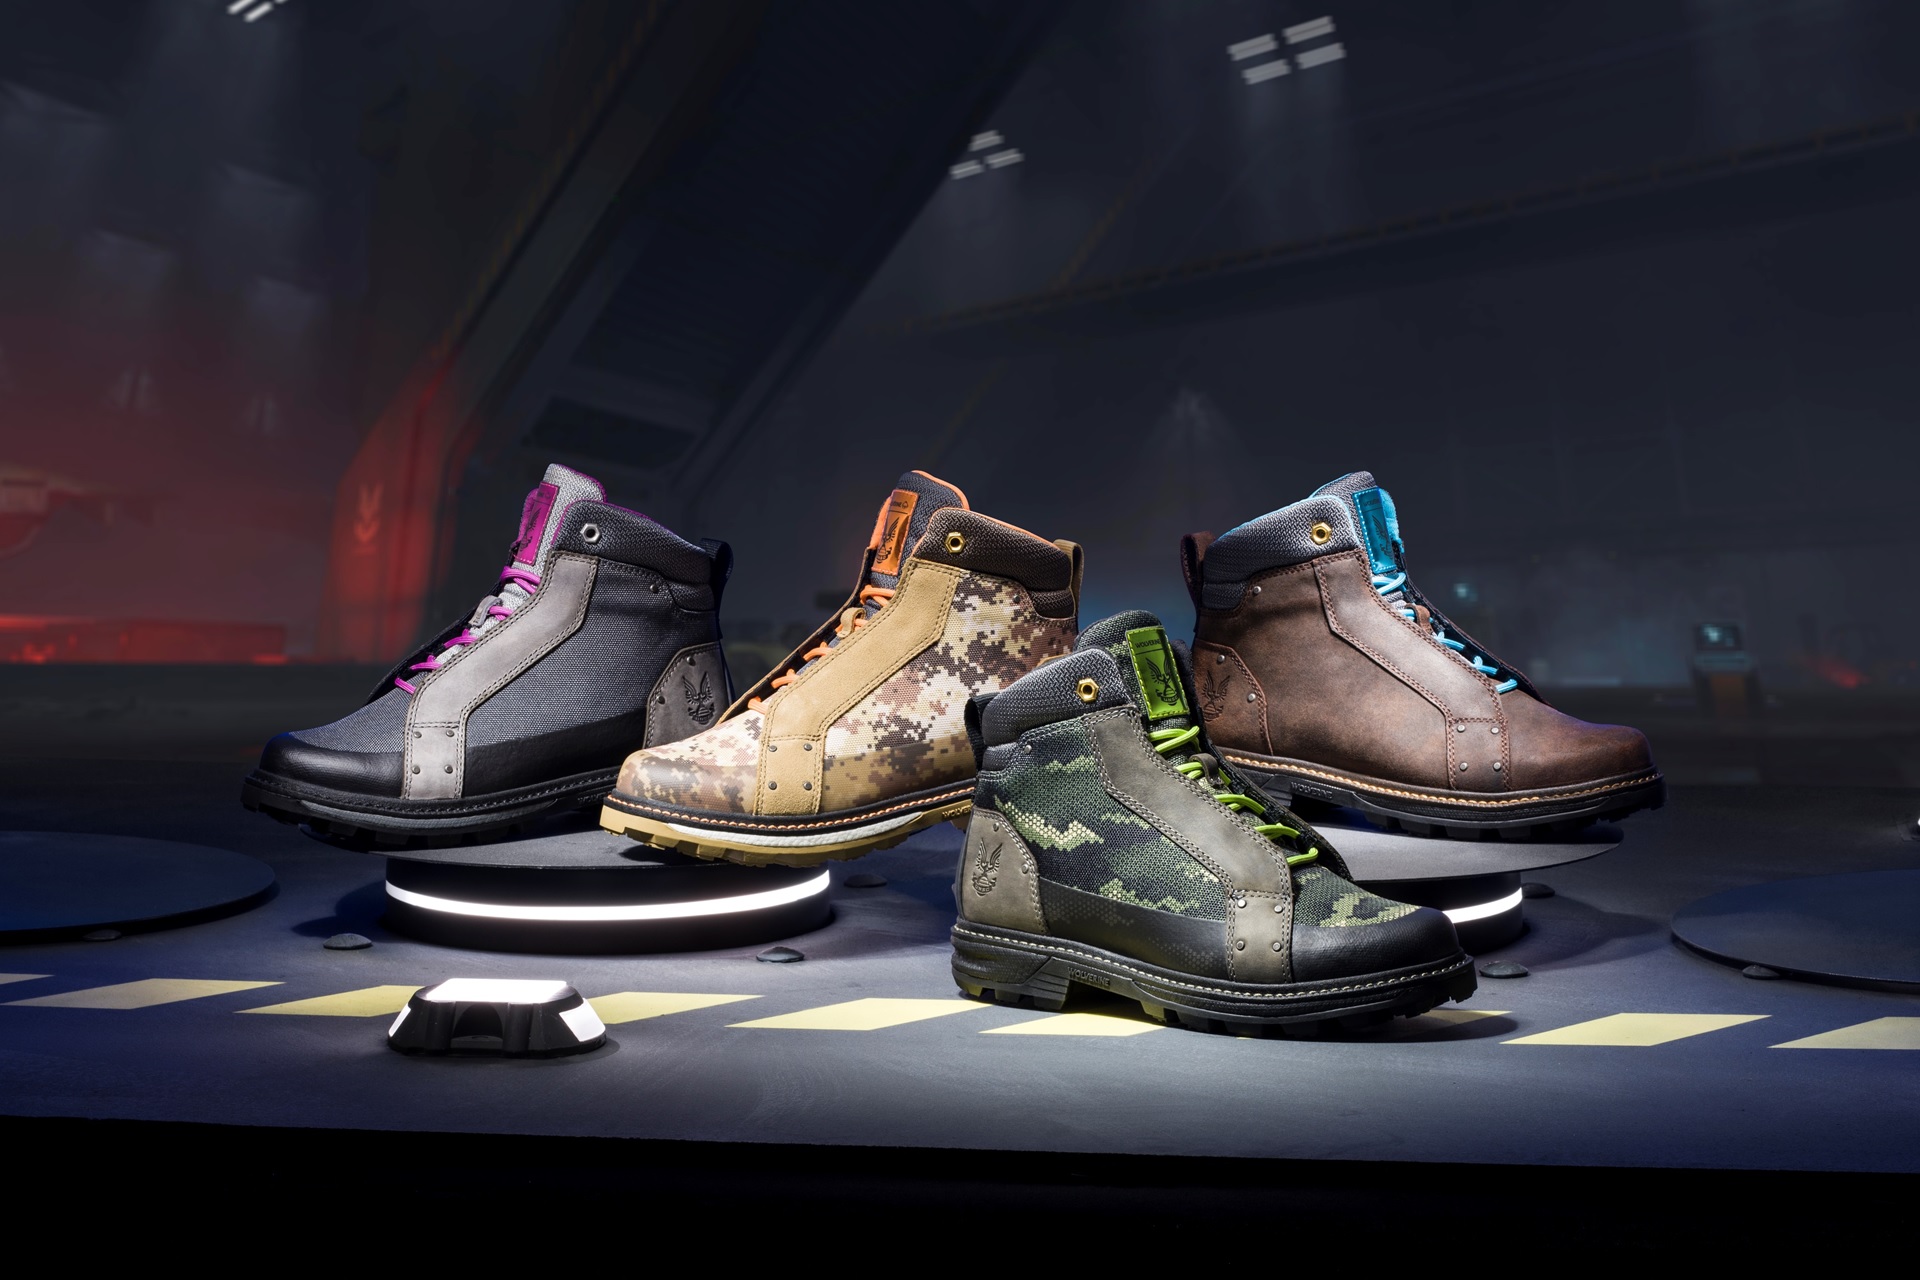 Image of Halo x Wolverine boots